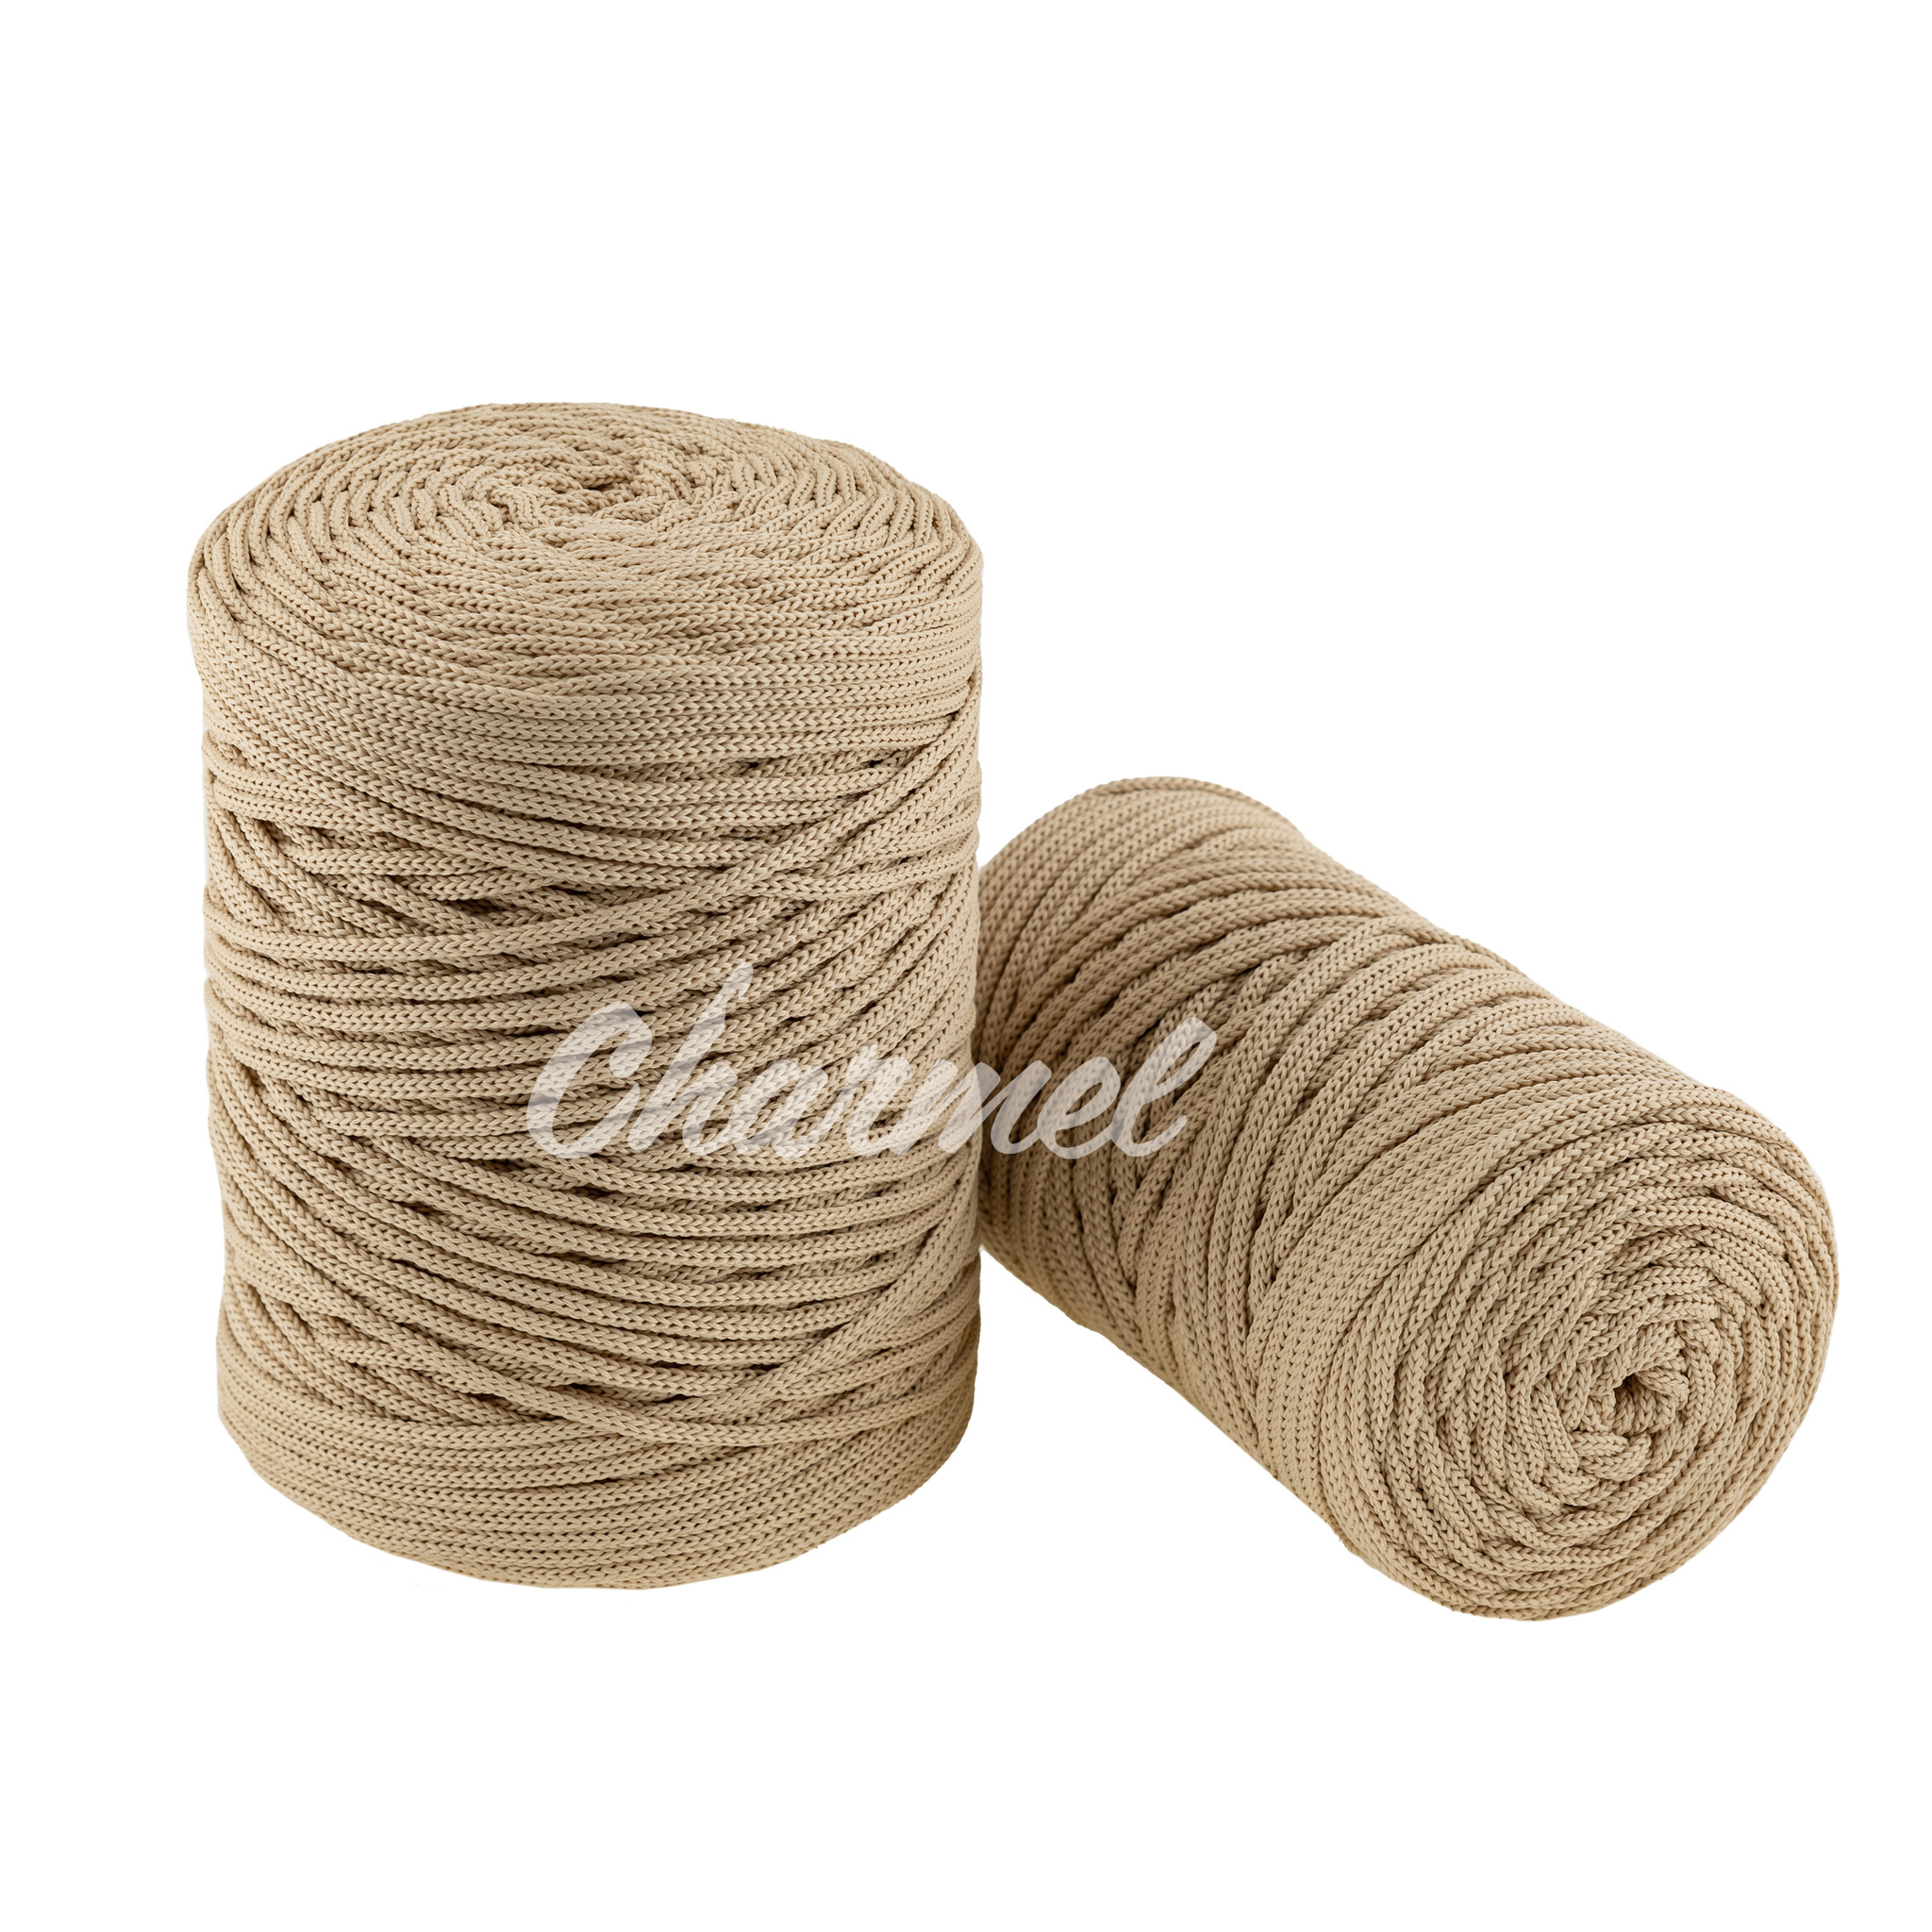 Polyester cord 3 mm with core 200 mts, macramé rope 3 mm, rope for